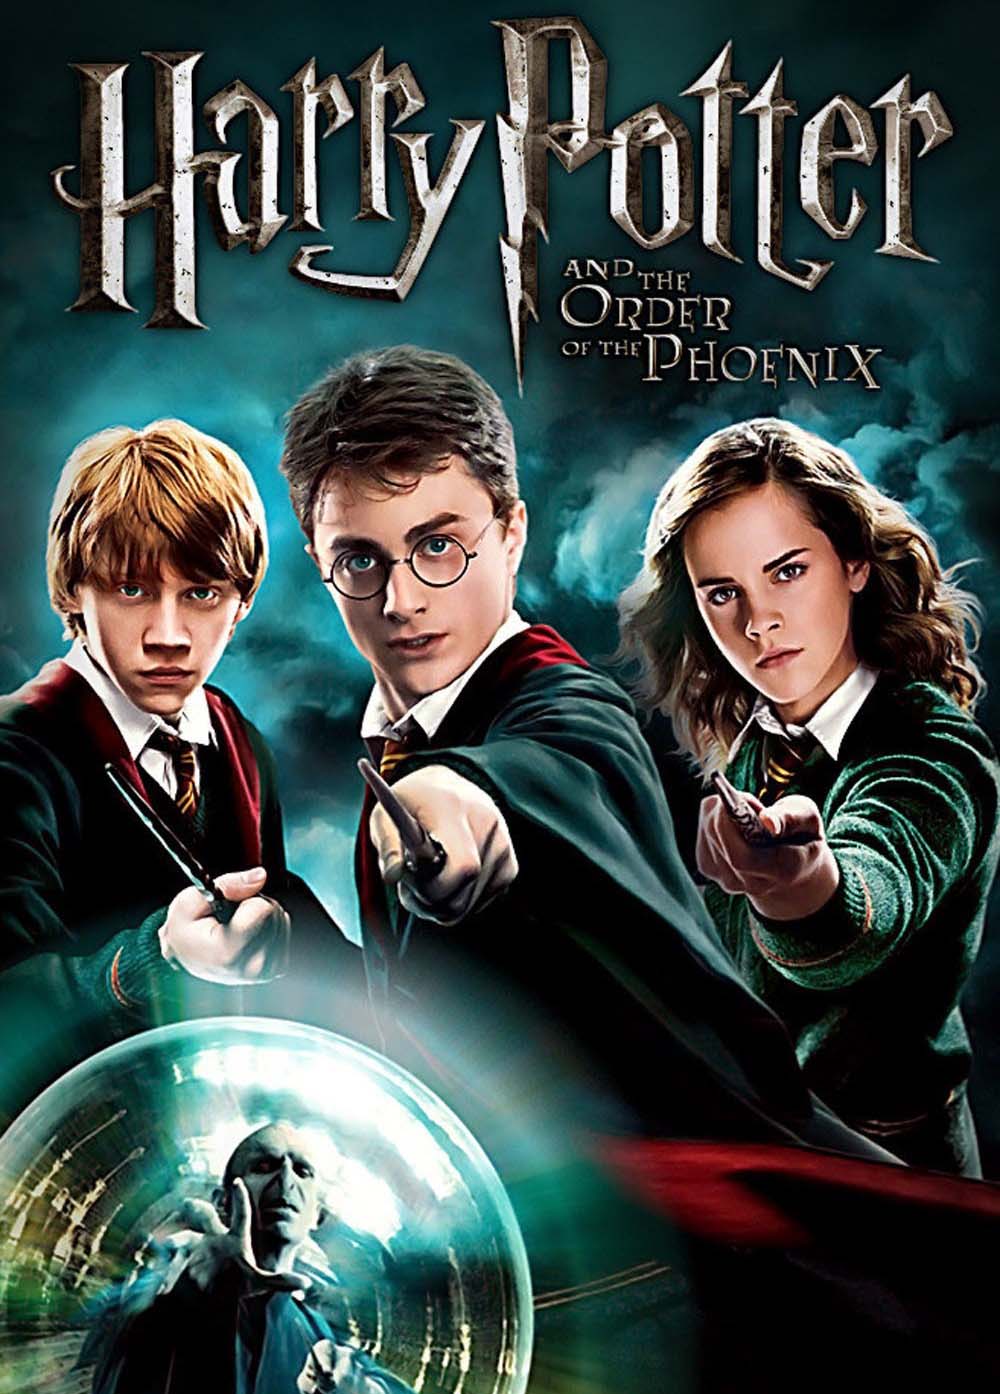 Harry potter movies download in tamil